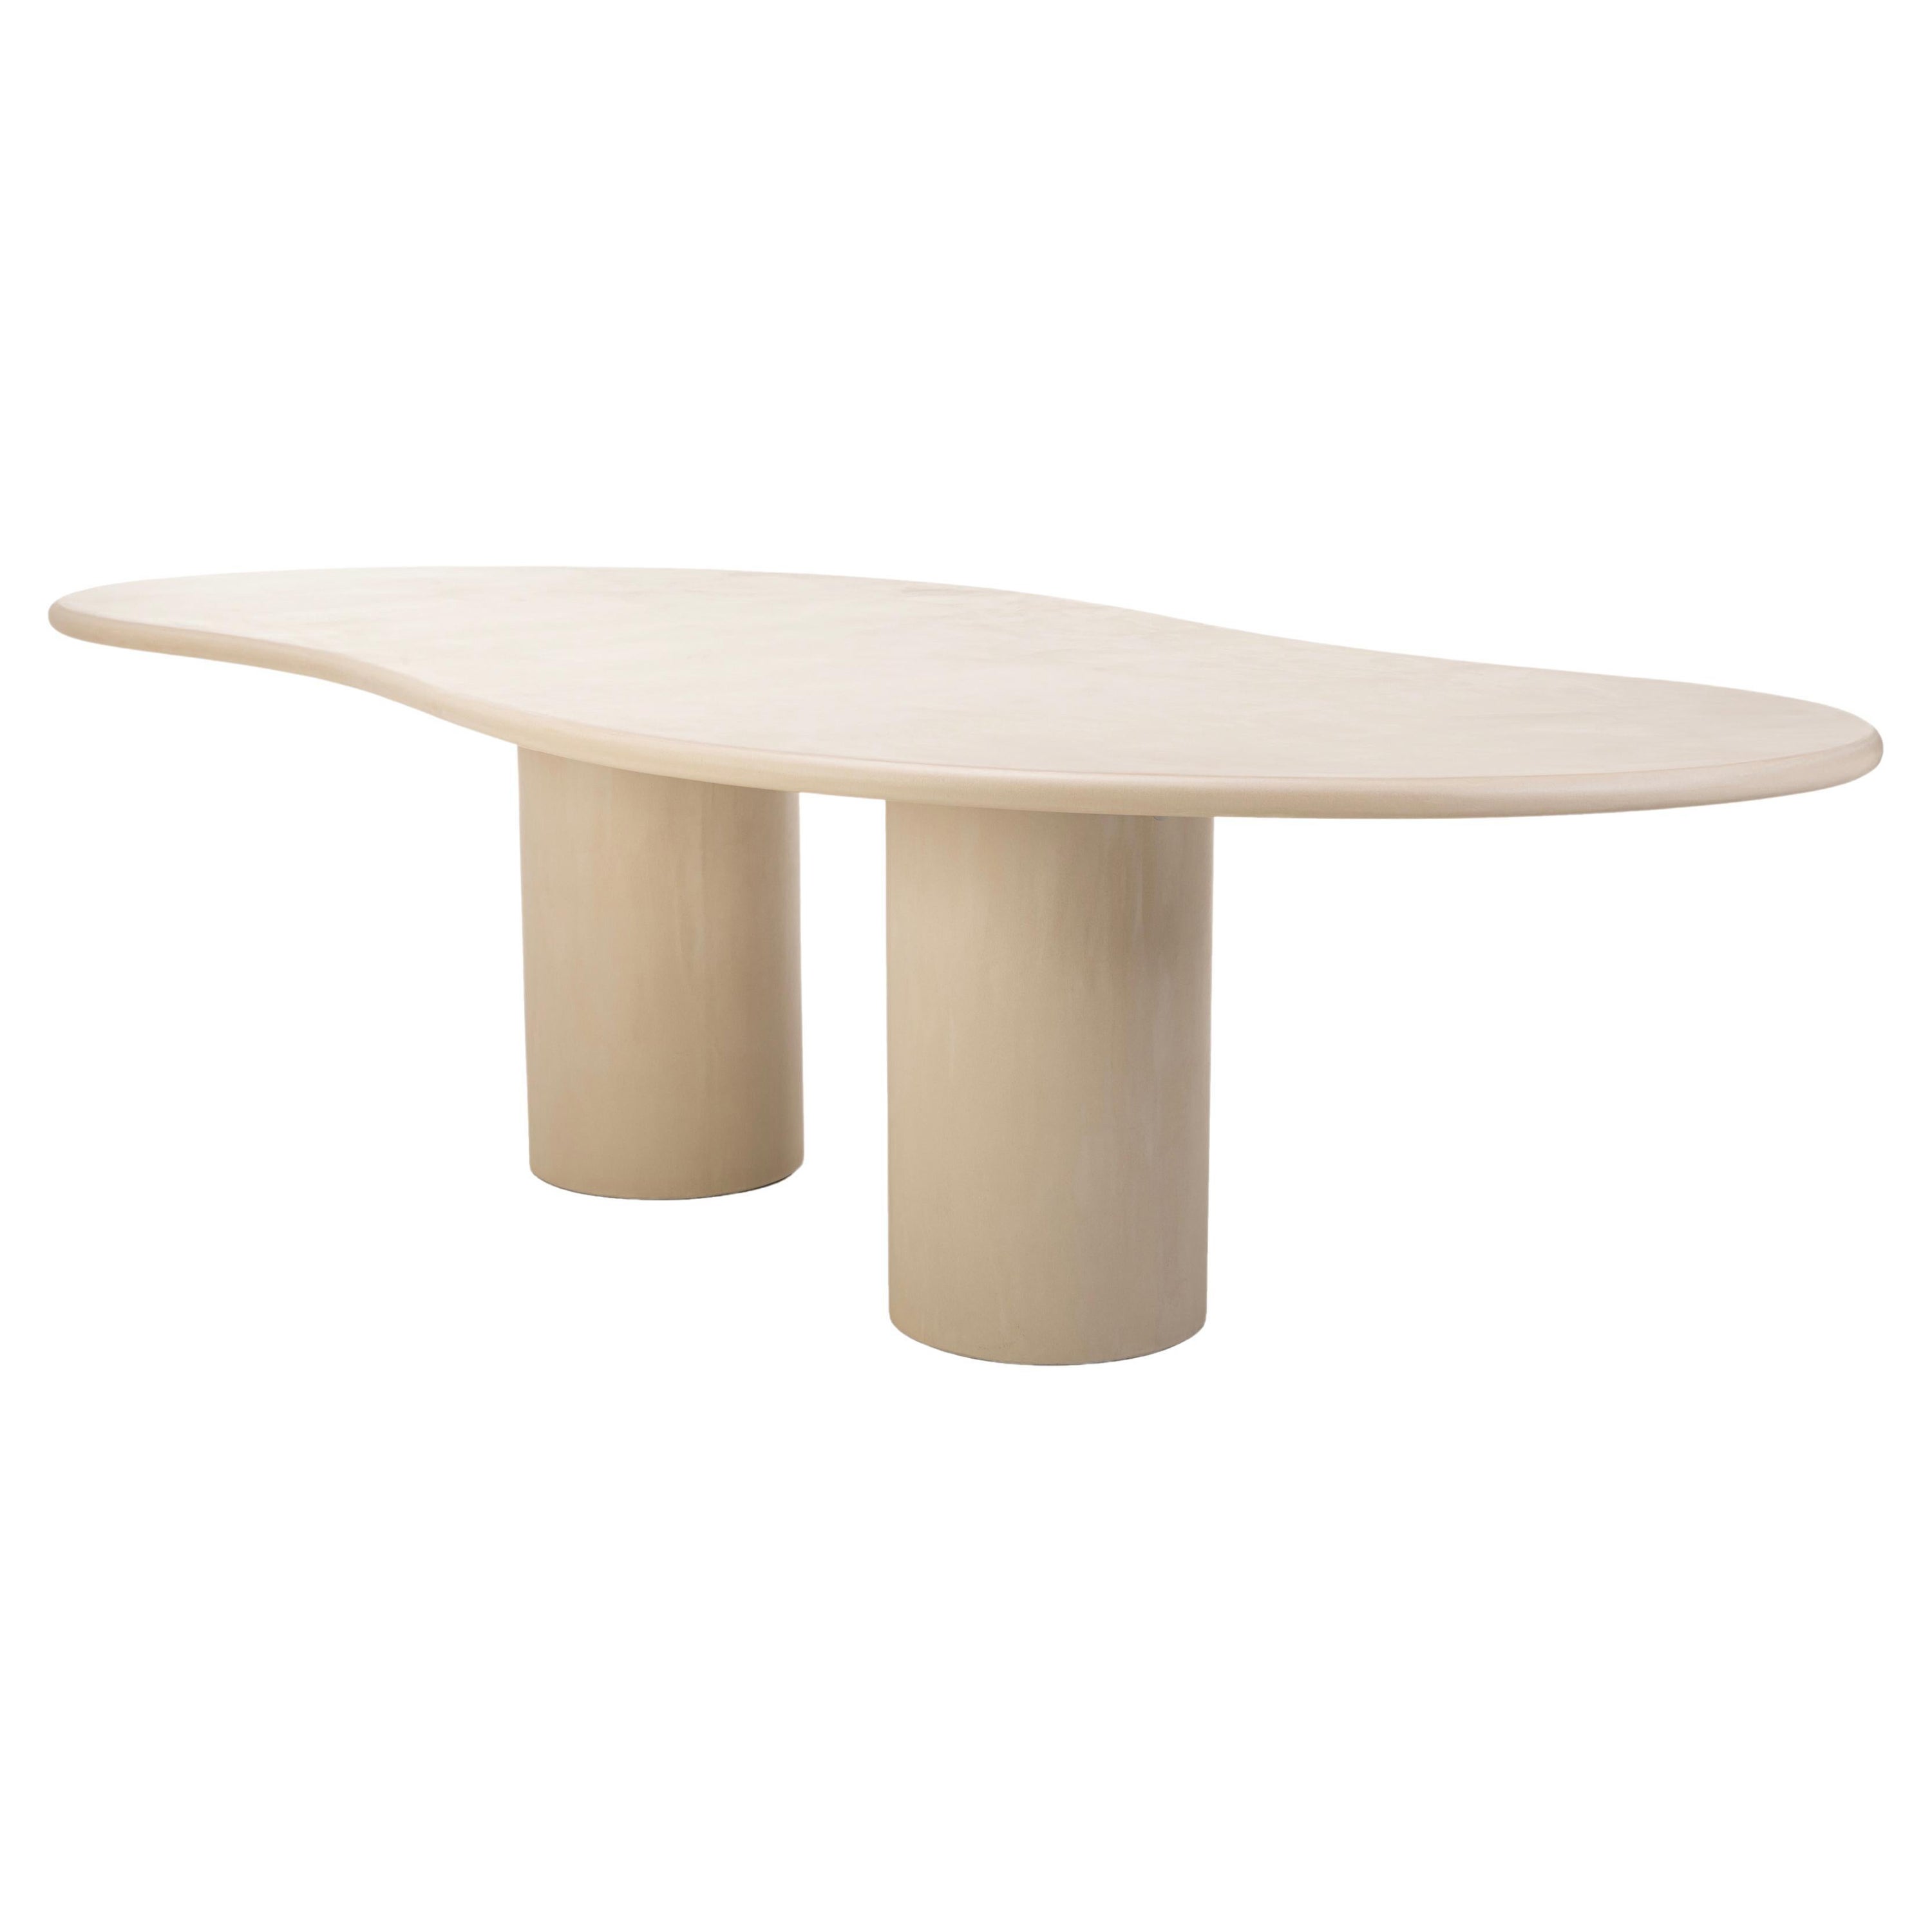 Natural Plaster Dining Table "Latus" 280 by Isabelle Beaumont For Sale